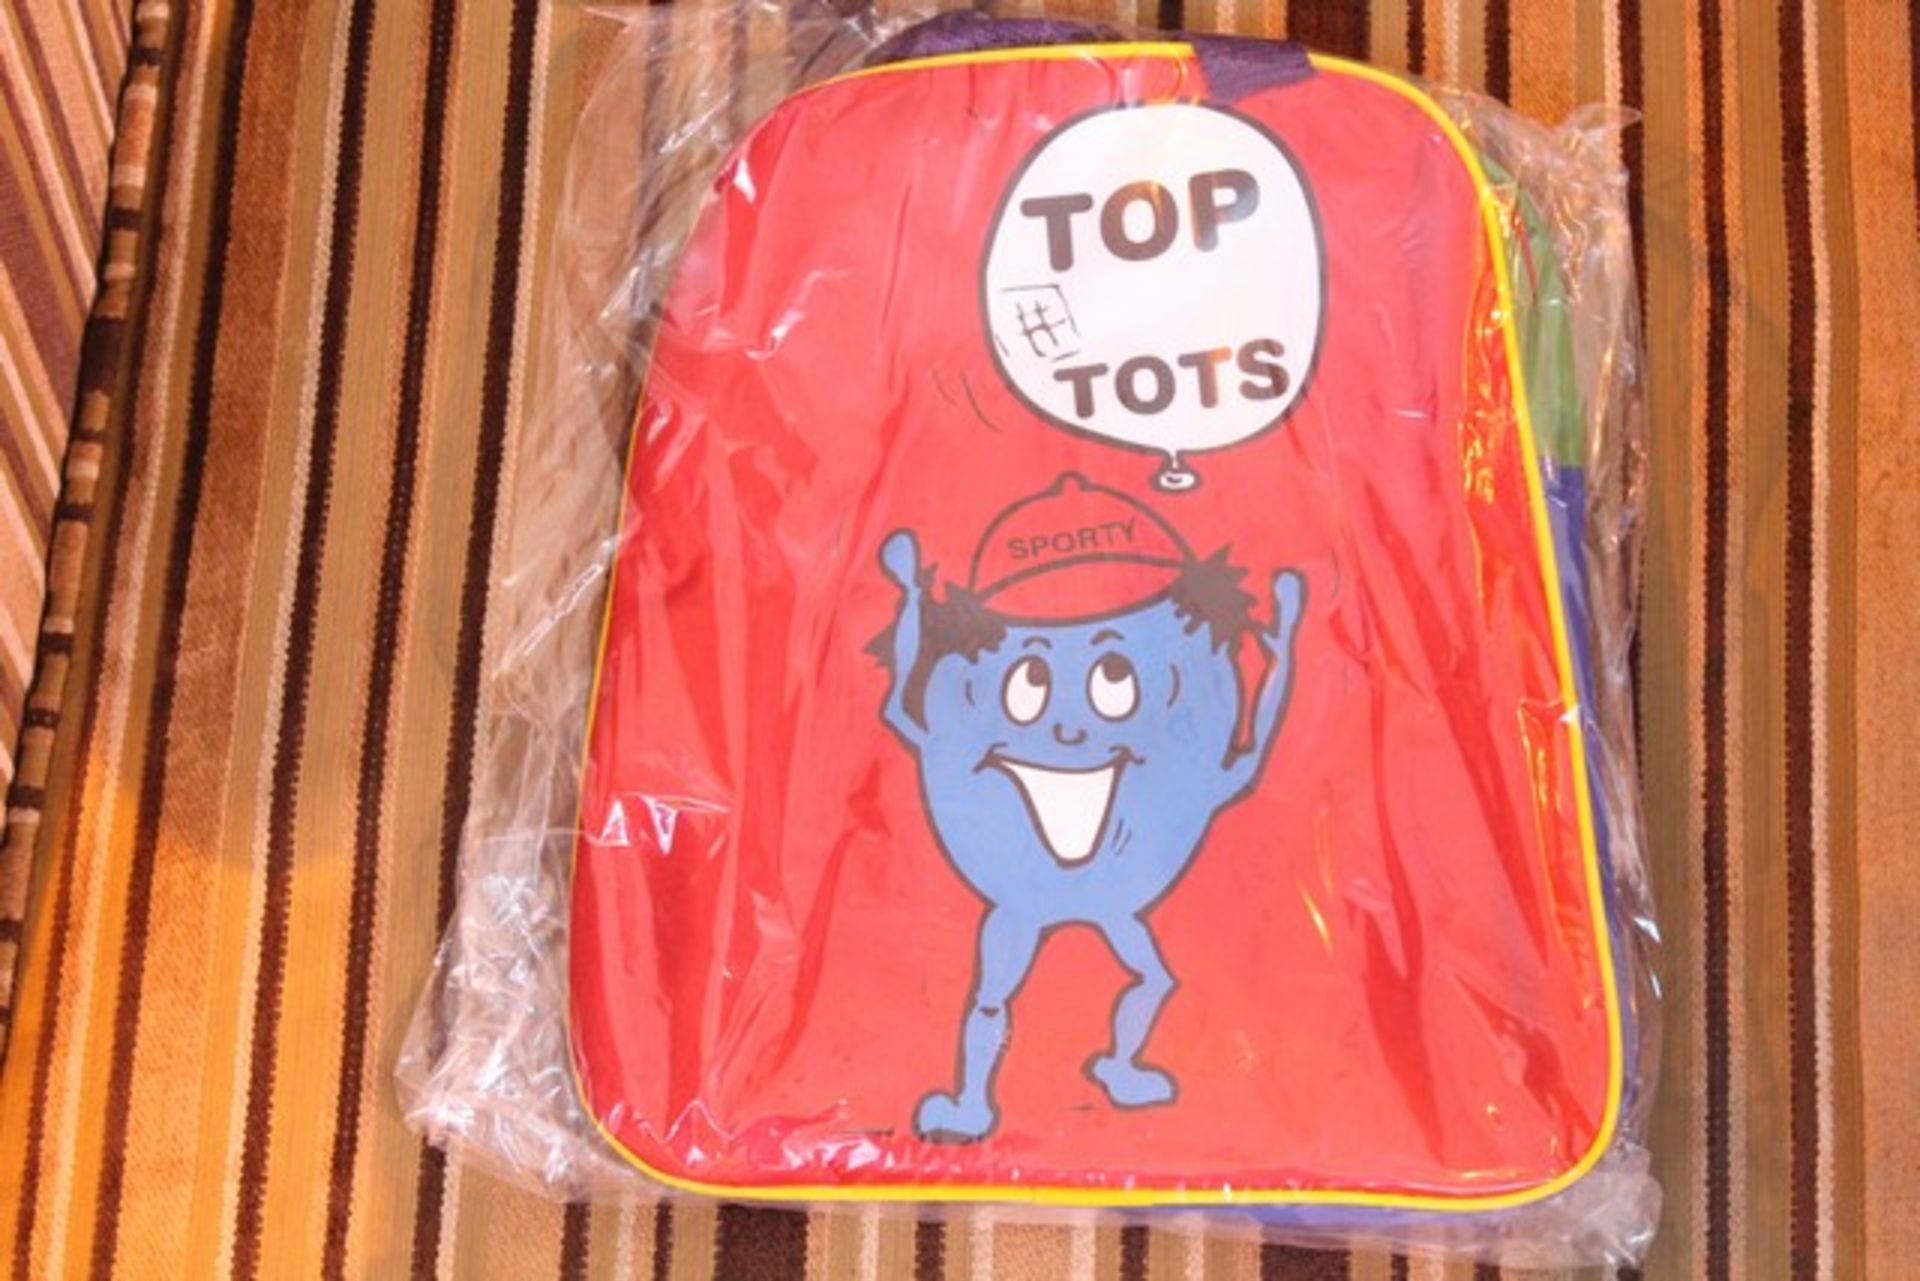 5 x TOP TOTS BACK PACKS   *Please note that the bid price is multiplied by the number of items in